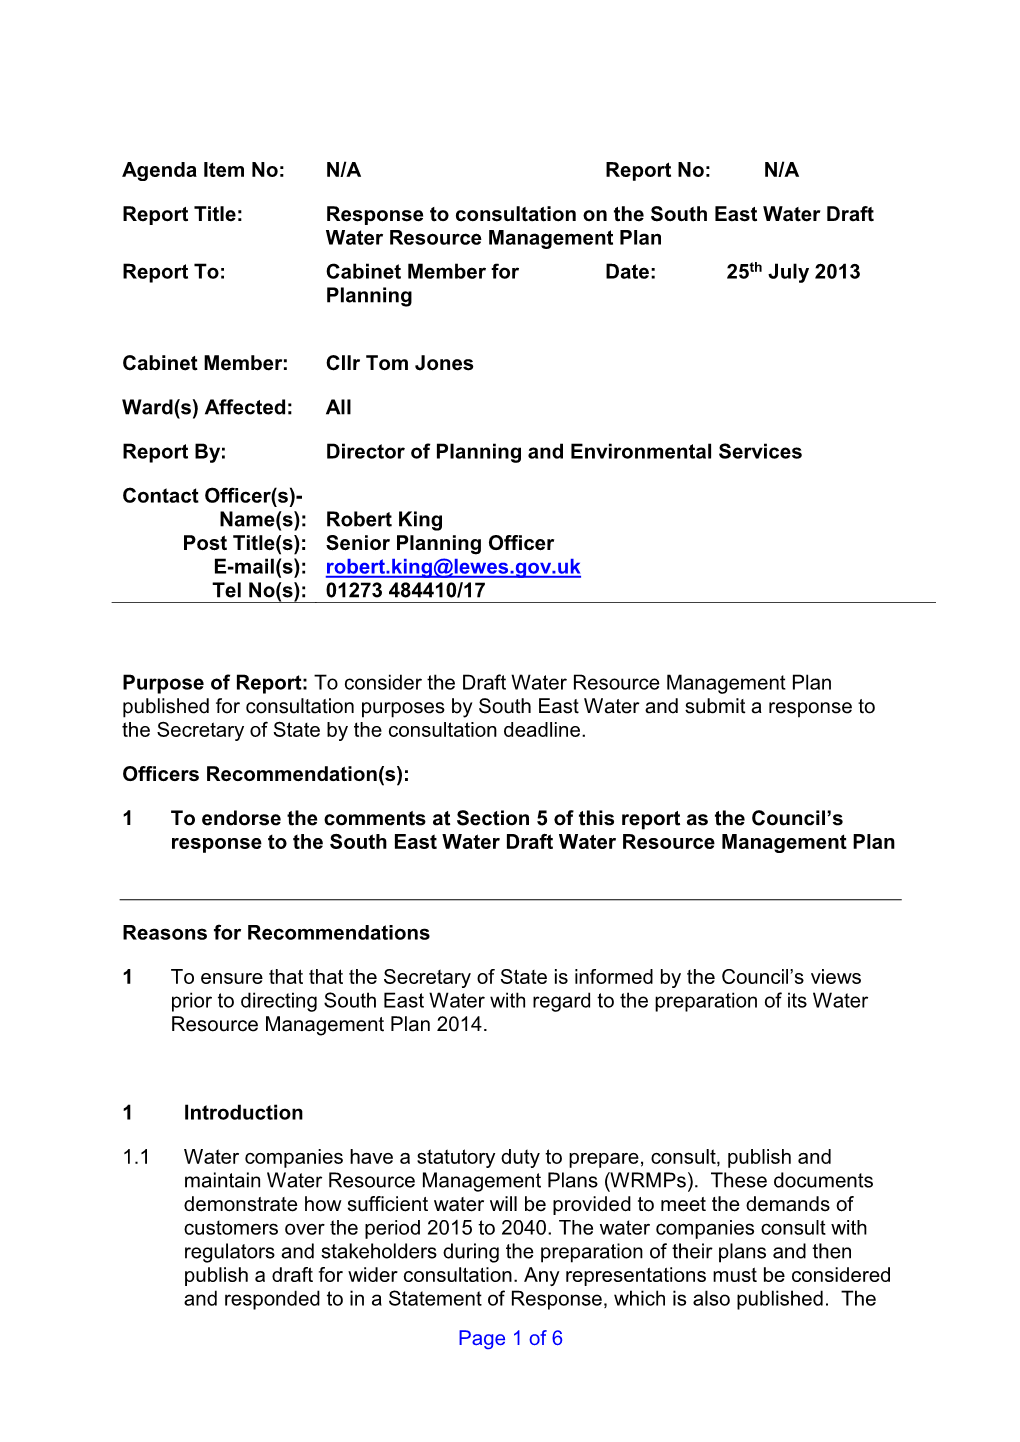 Response to Consultation on the South East Water Draft Water Resource Management Plan Report To: Cabinet Member for Date: 25Th July 2013 Planning